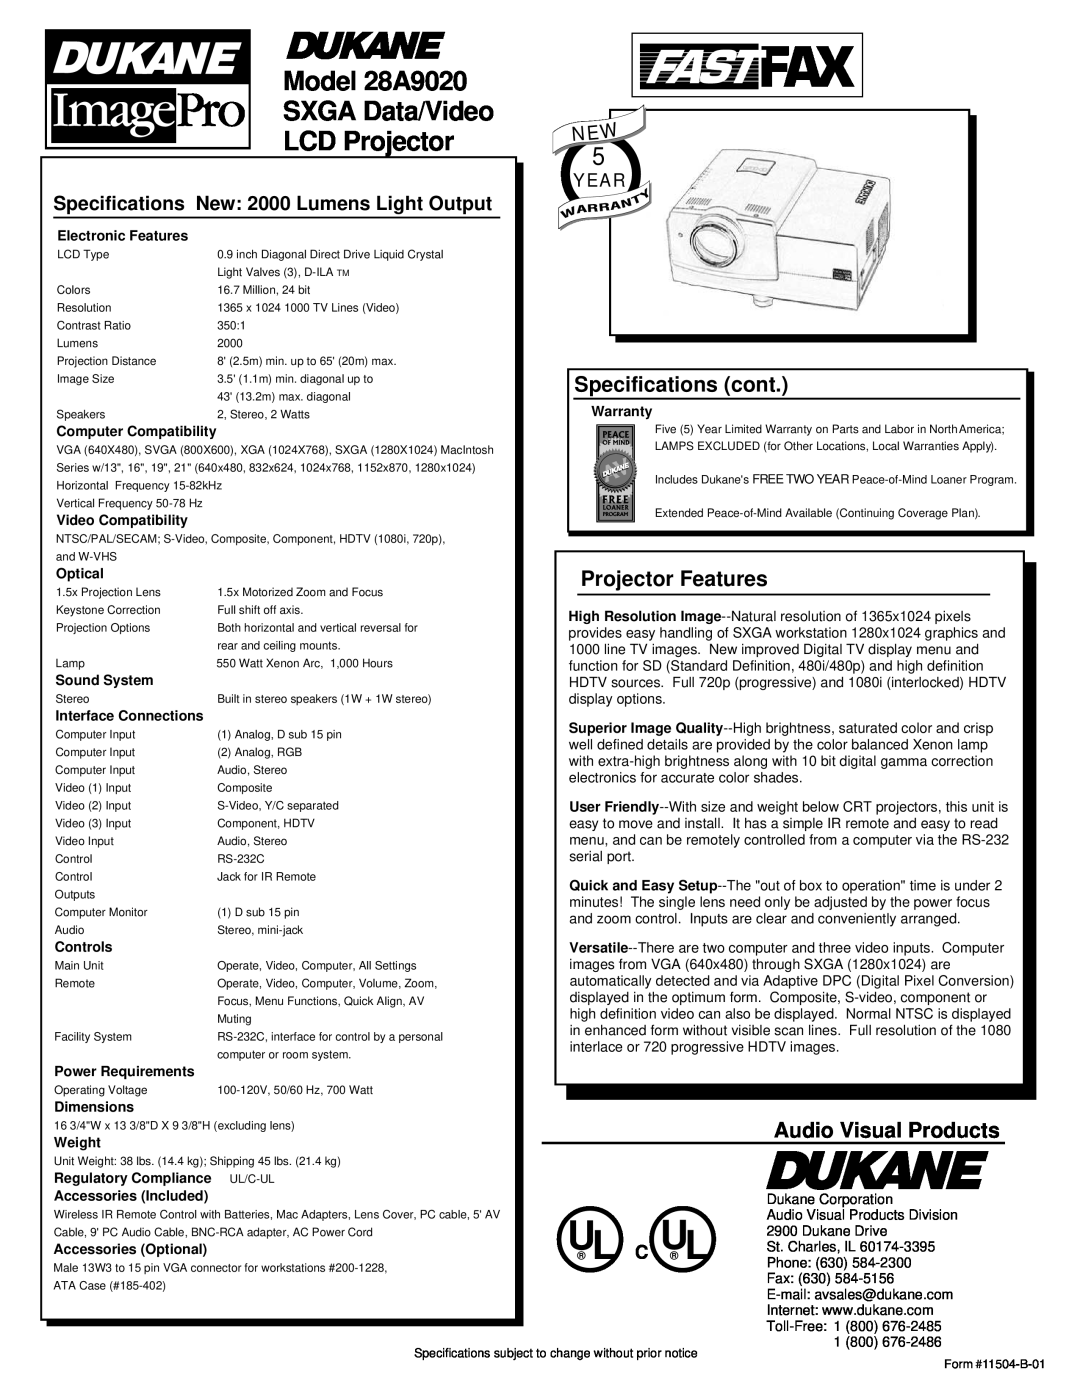 Dukane Model 28A9020, SXGA Data/Video, LCD Projector, Specifications cont, Projector Features, Audio Visual Products 